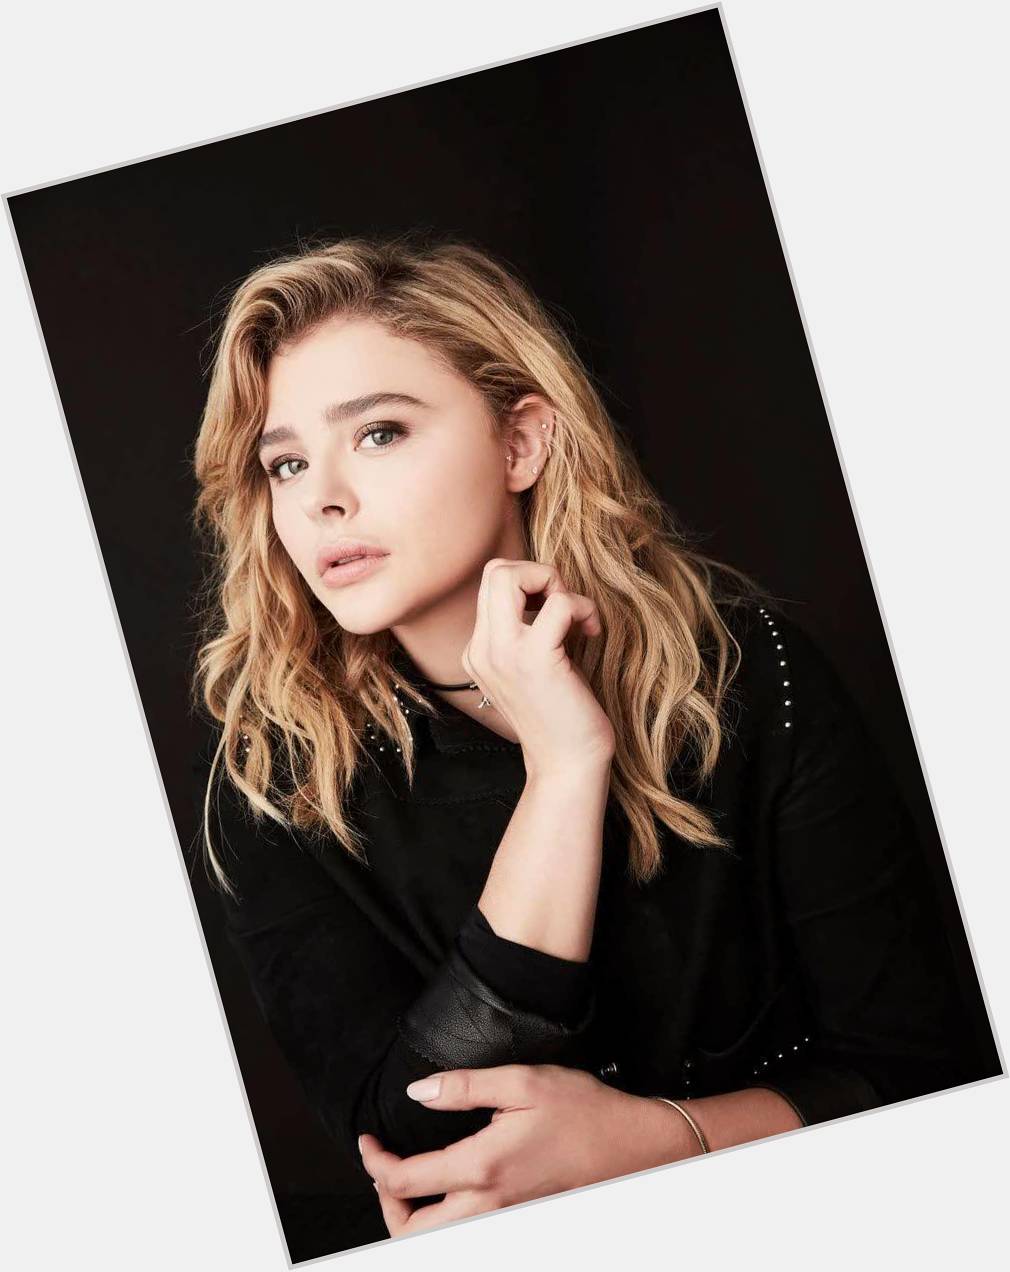 Happy birthday to Chloe Grace Moretz! The American actress turns 22 today. 